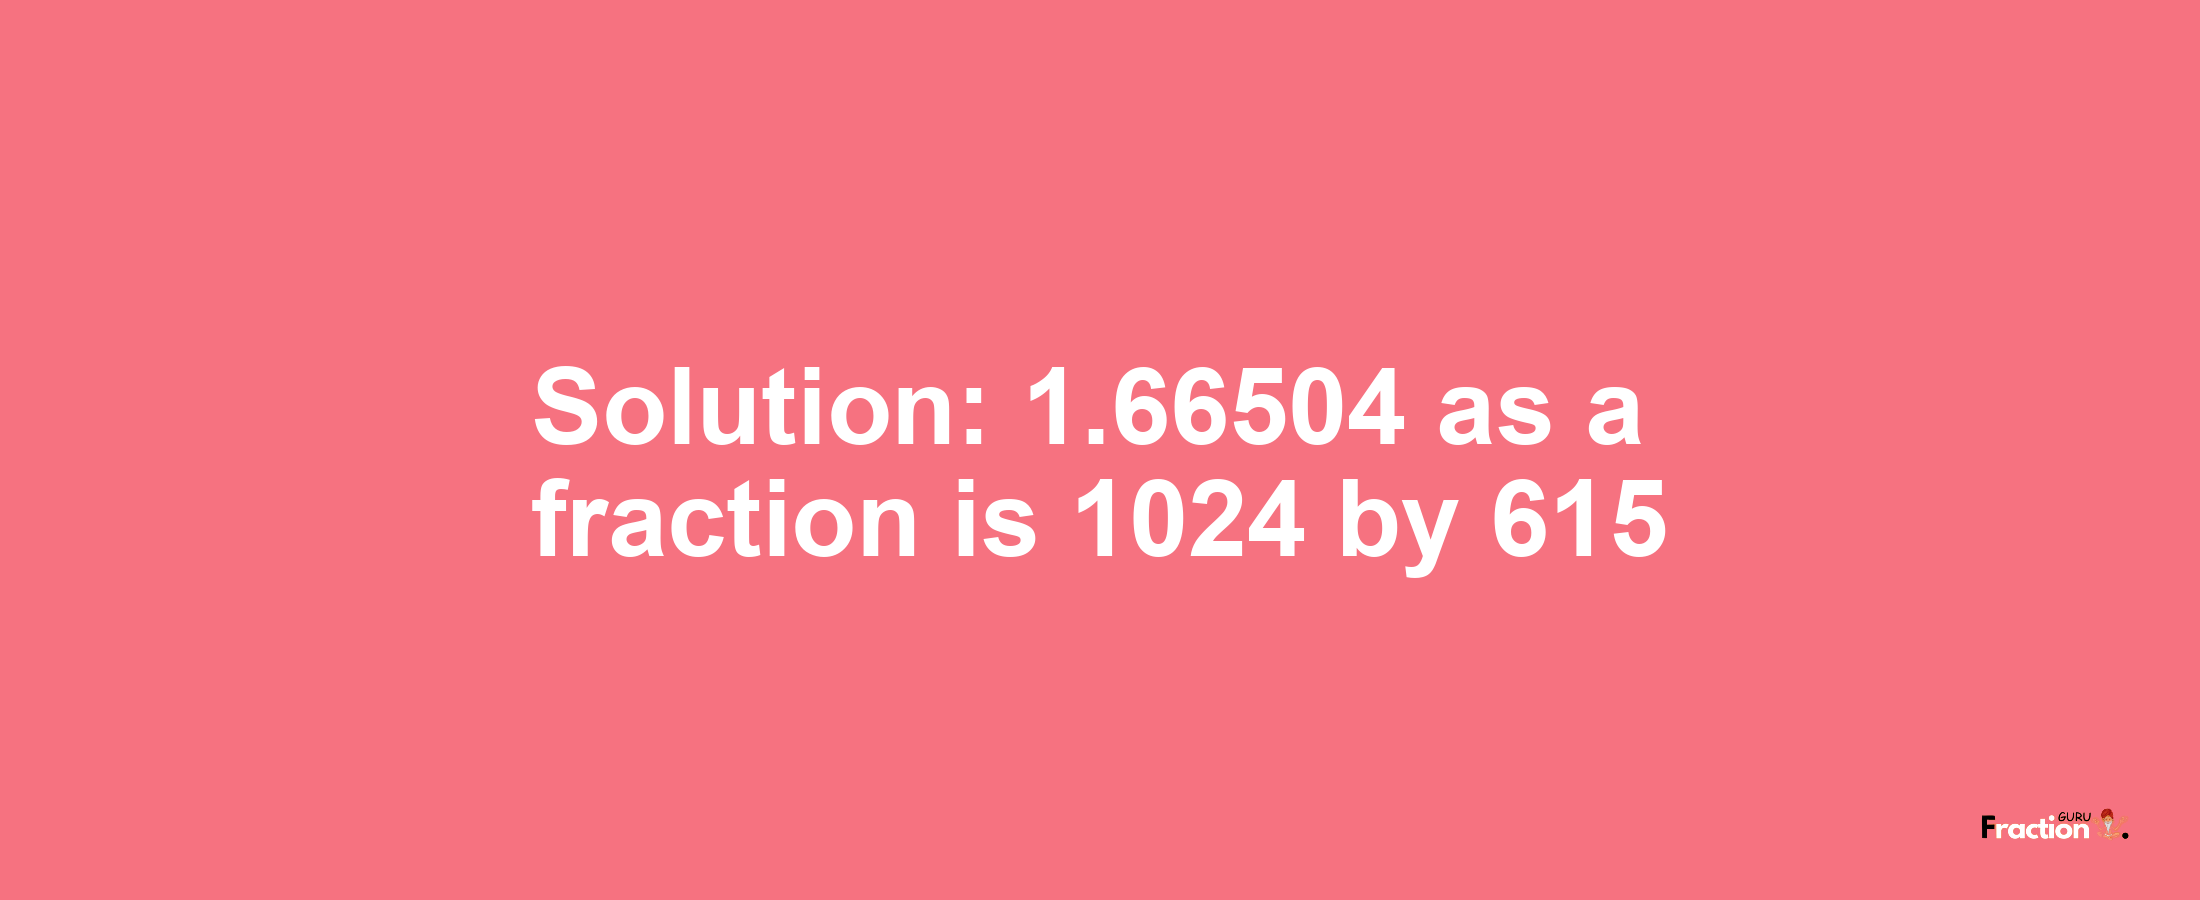 Solution:1.66504 as a fraction is 1024/615